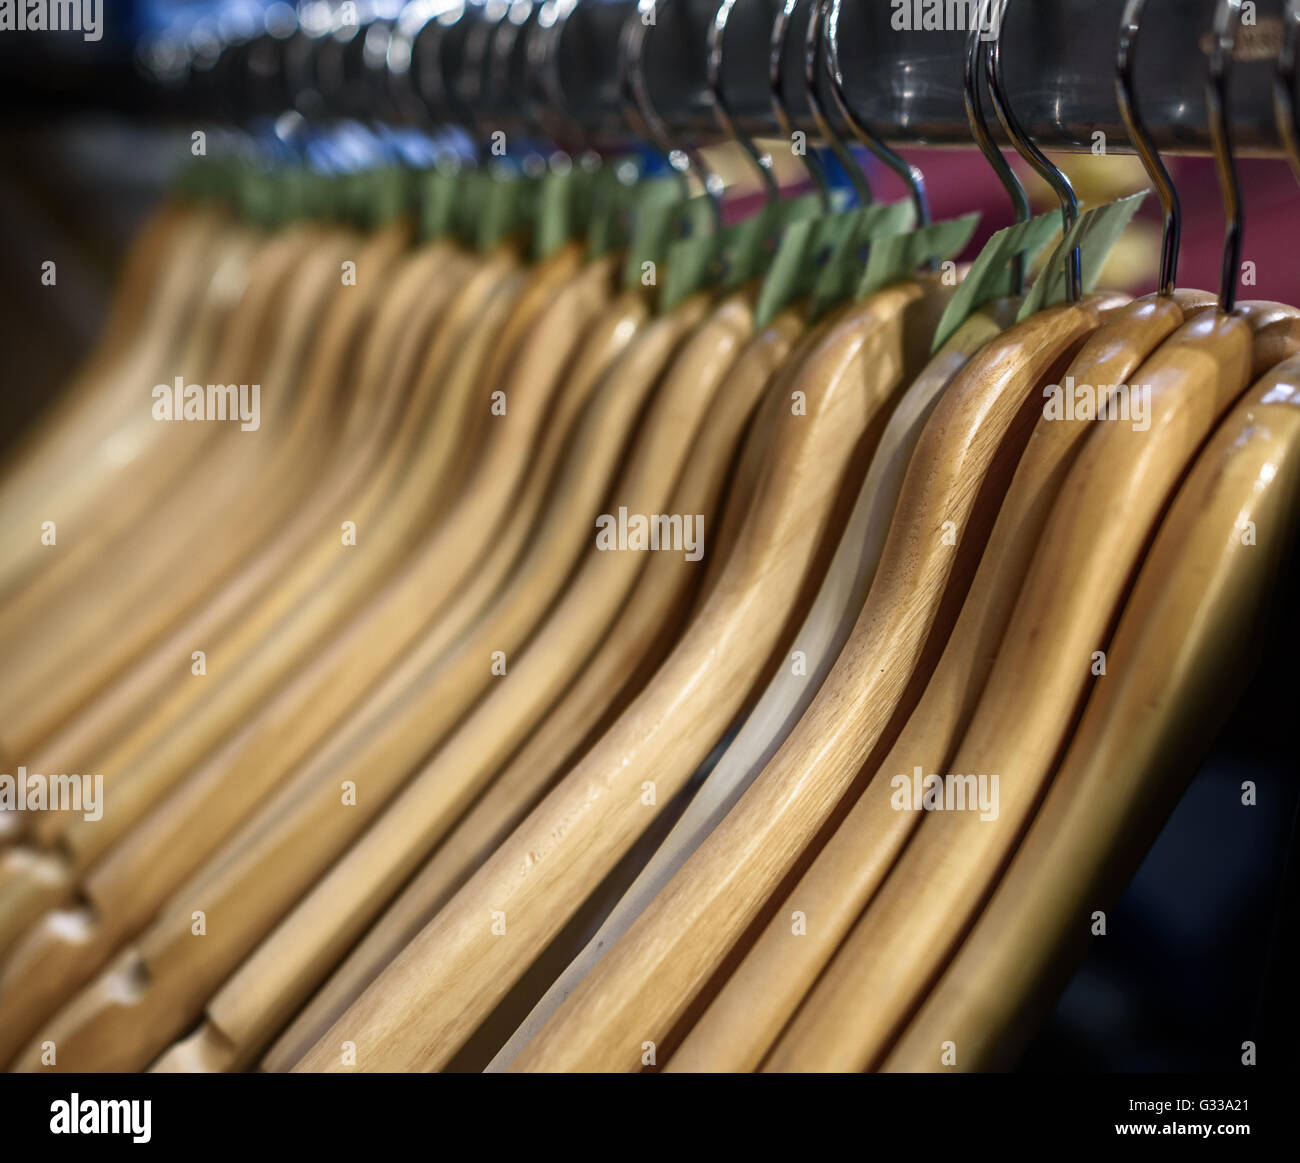 Wooden clothes hangers on a rail. Stock Photo